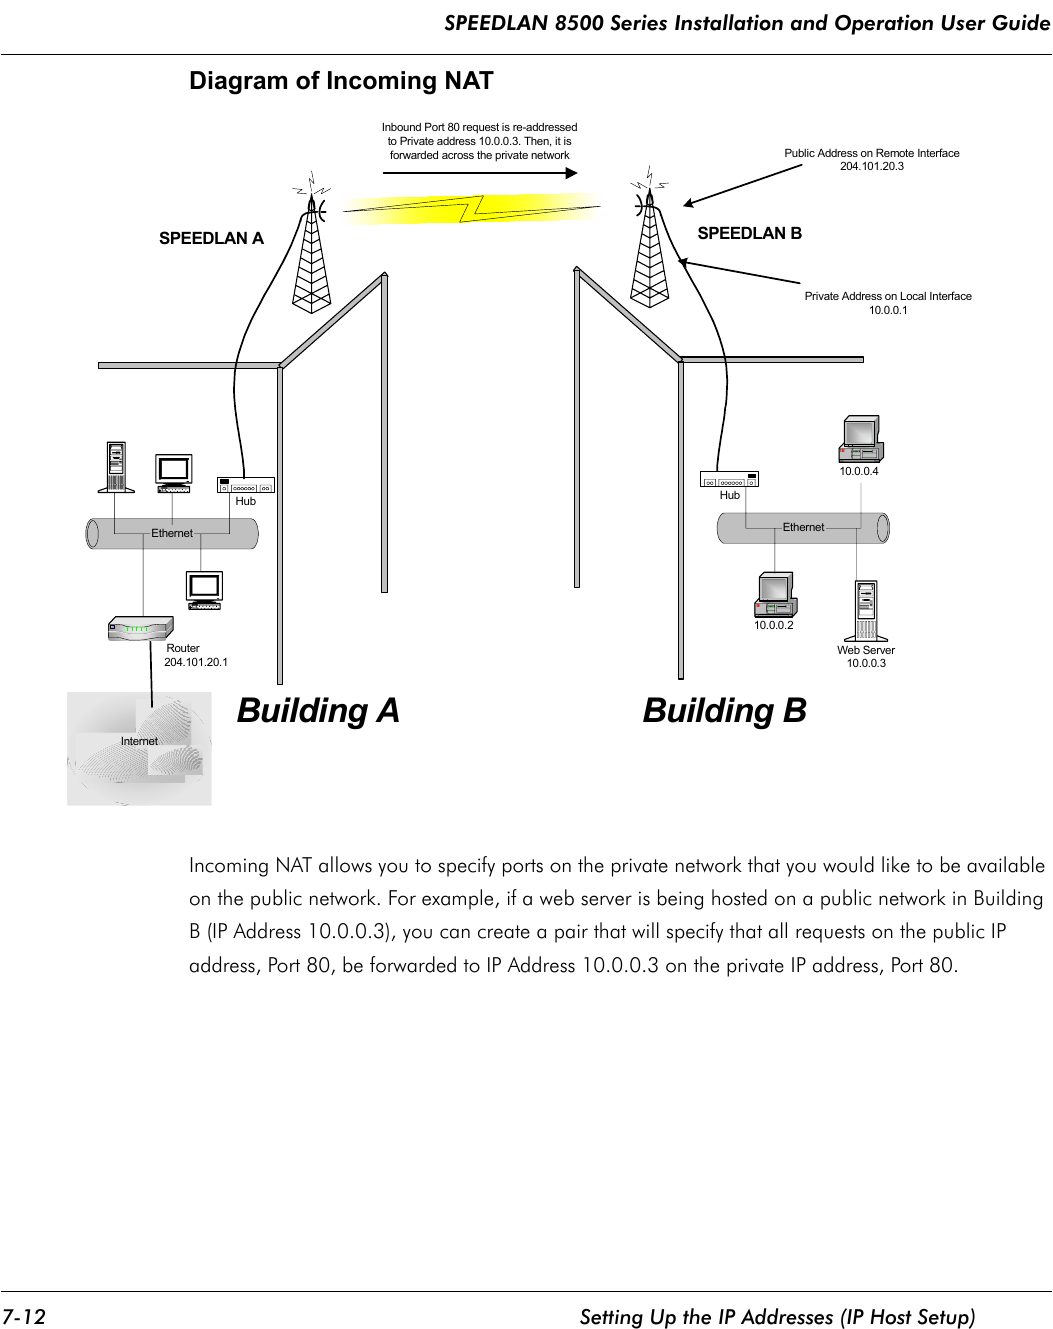 SPEEDLAN 8500 Series Installation and Operation User Guide 7-12 Setting Up the IP Addresses (IP Host Setup)Diagram of Incoming NATIncoming NAT allows you to specify ports on the private network that you would like to be available on the public network. For example, if a web server is being hosted on a public network in Building B (IP Address 10.0.0.3), you can create a pair that will specify that all requests on the public IP address, Port 80, be forwarded to IP Address 10.0.0.3 on the private IP address, Port 80.Inbound Port 80 request is re-addressedto Private address 10.0.0.3. Then, it isforwarded across the private networkInternetEthernet                               Router                                        204.101.20.1SPEEDLAN AHubSPEEDLAN BPrivate Address on Local Interface10.0.0.110.0.0.210.0.0.4EthernetHubWeb Server10.0.0.3Public Address on Remote Interface204.101.20.3Building A Building B